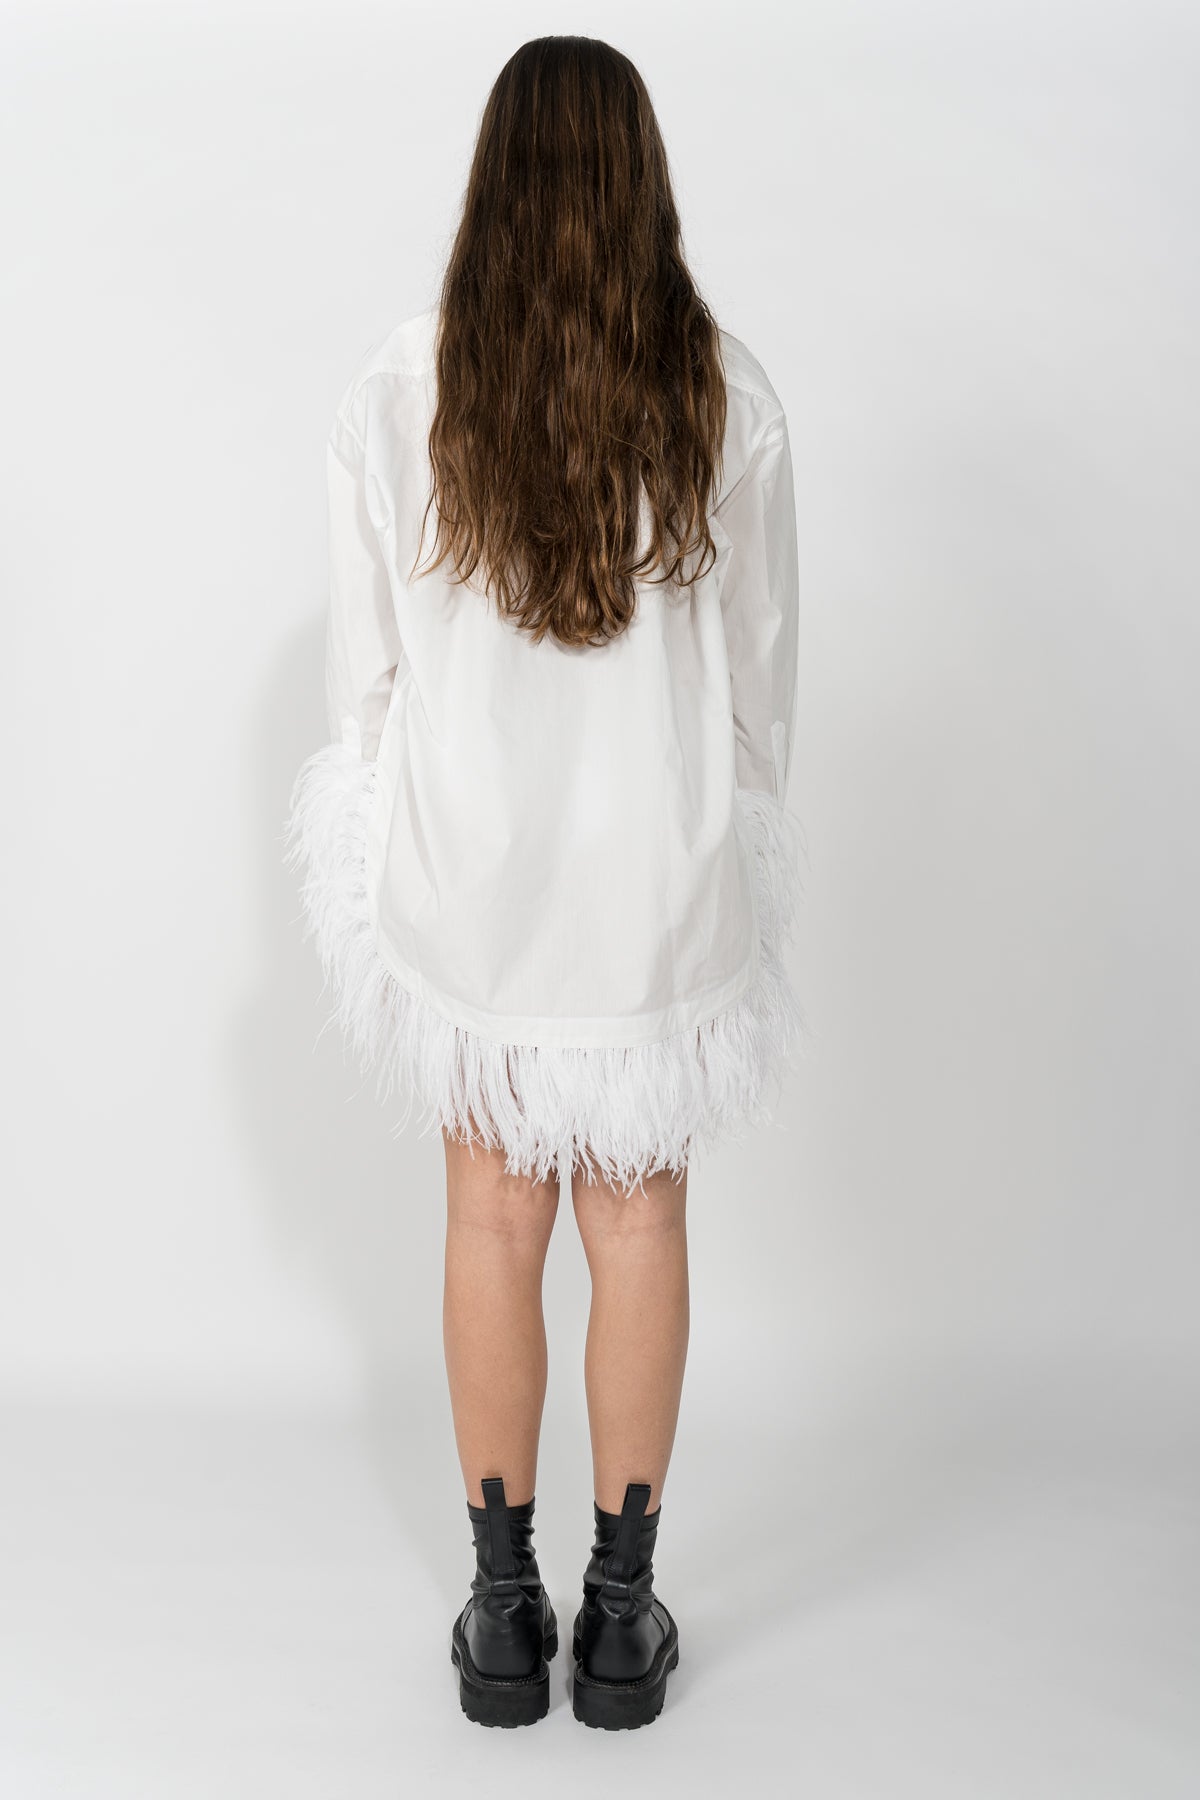 WHITE XXL SHIRT WITH FEATHERS MARQUES ALMEIDA